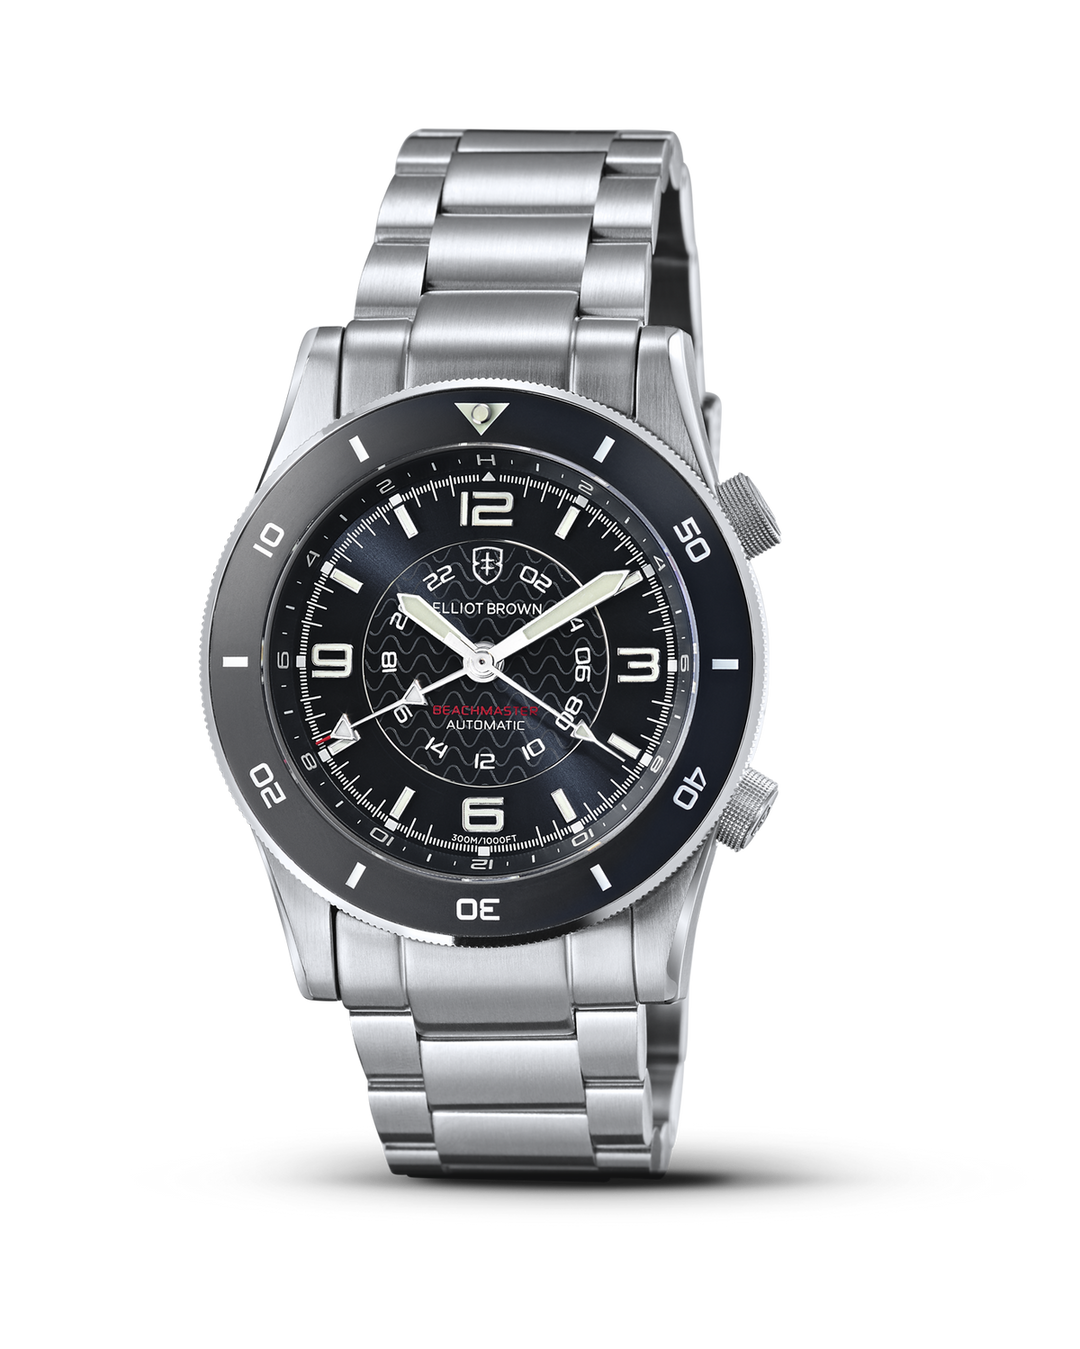 Elliot Brown Beachmaster Automatic watch,  model number 0H0-A01-B07, limited edition Number 015 of 500 watches.